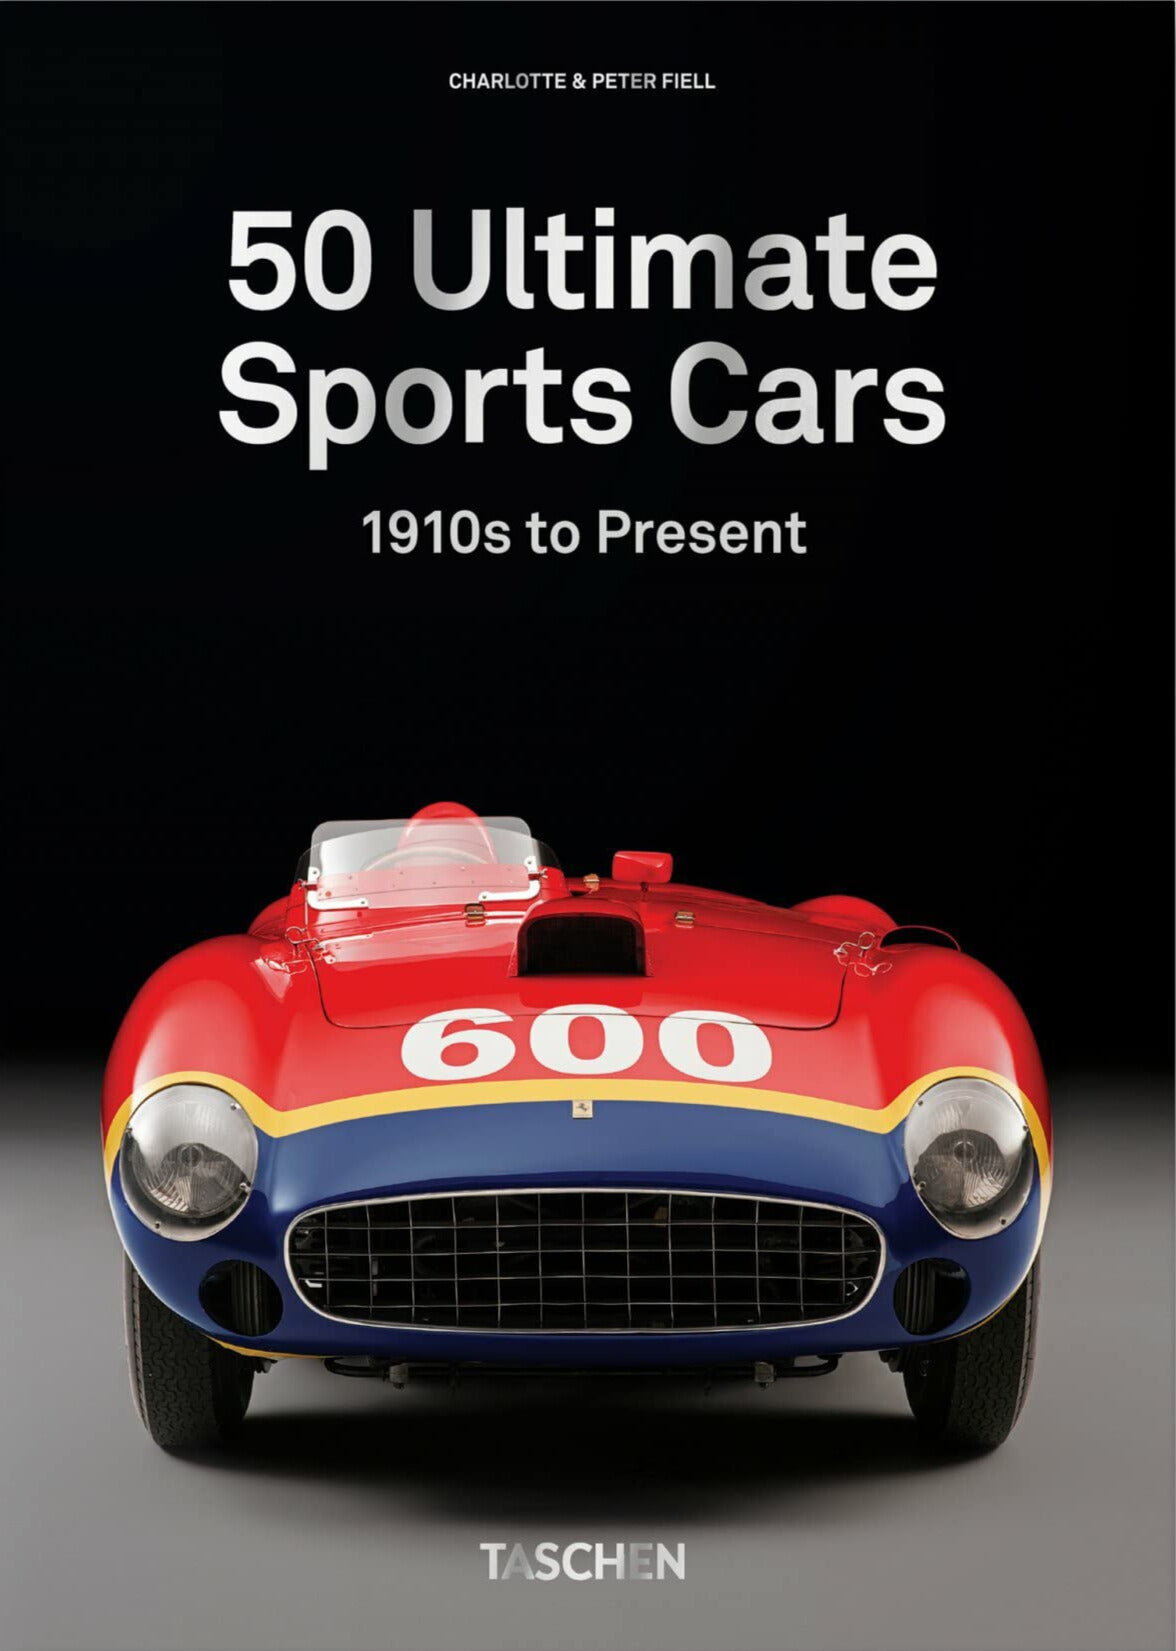 50 Ultimate Sports Cars. 40 series